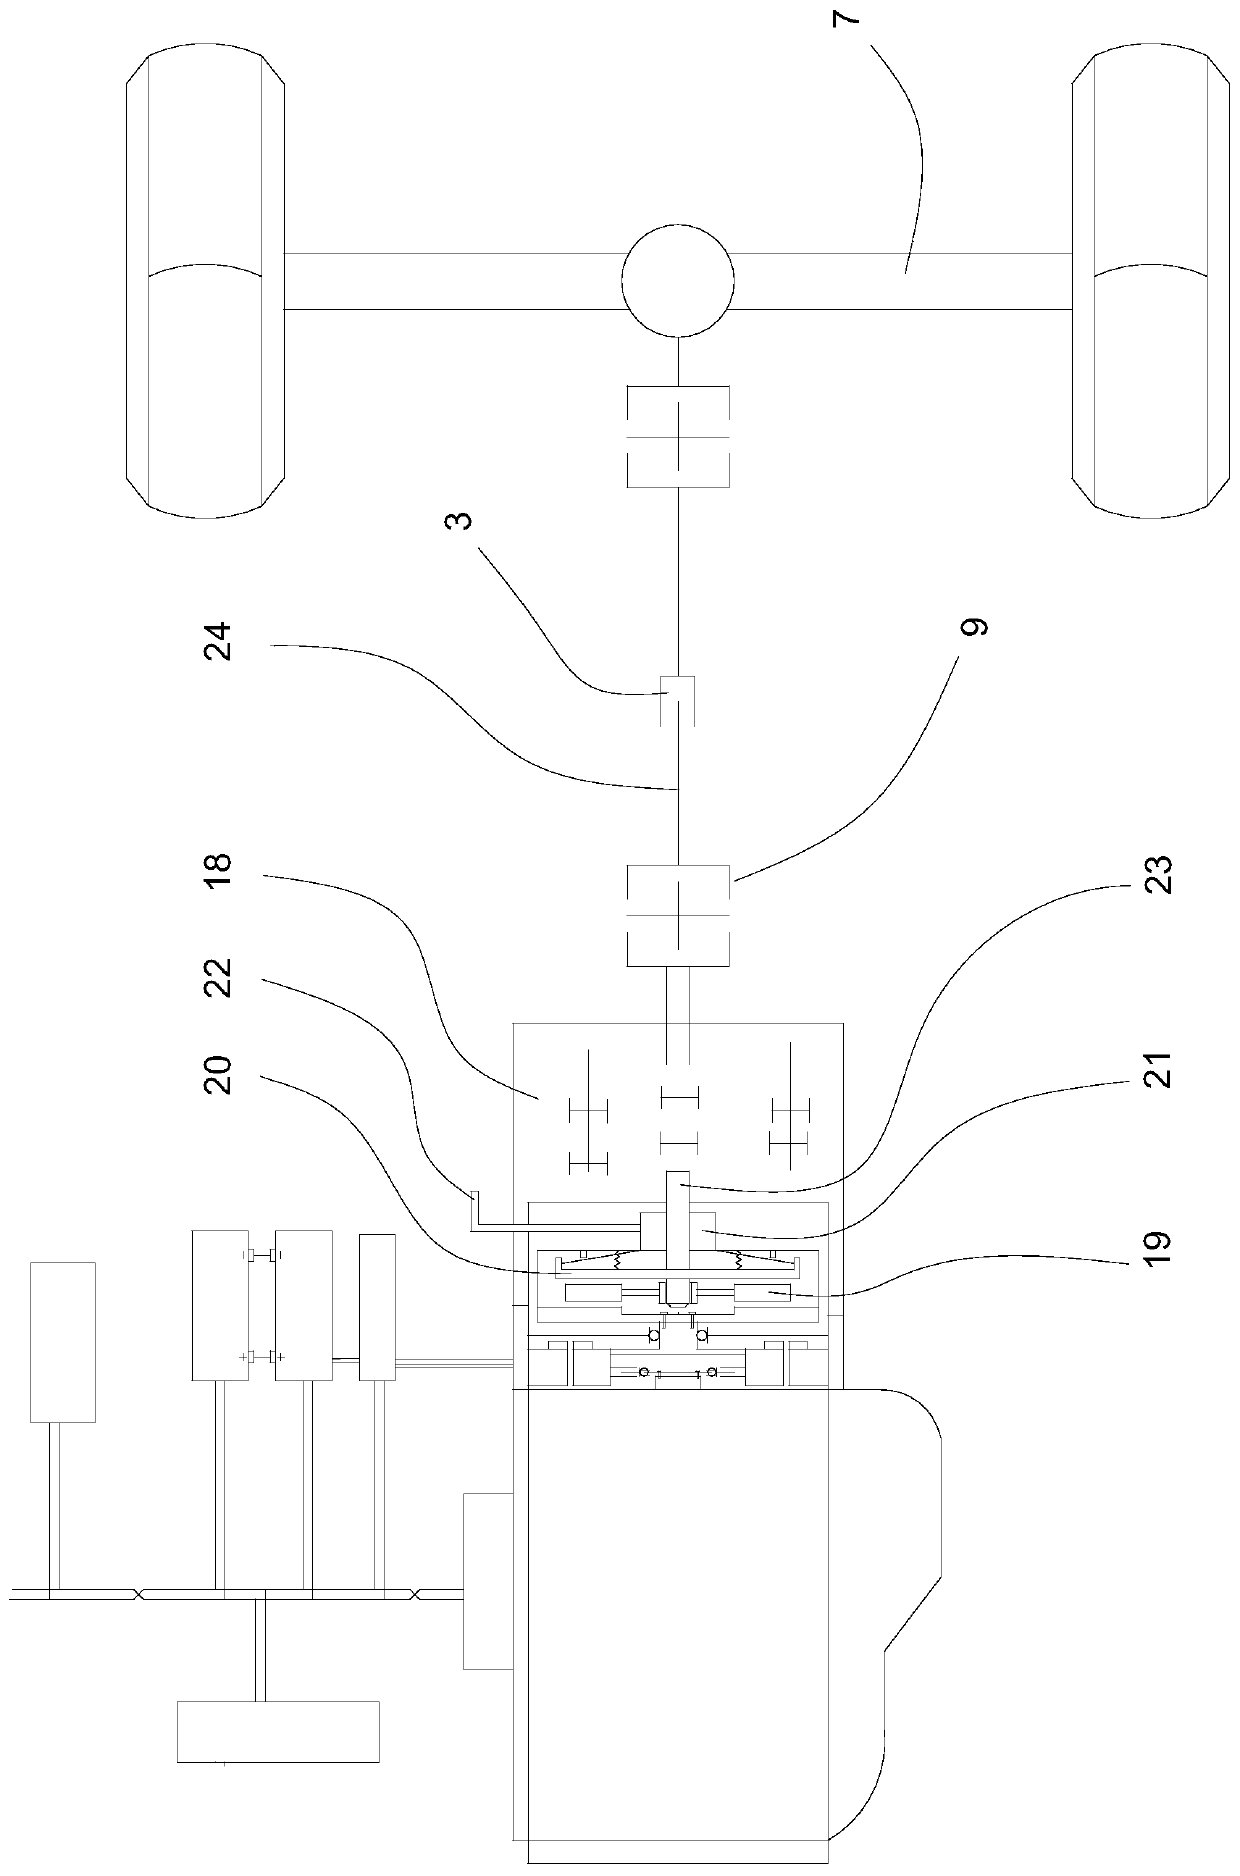 Electrically driven engine integrated power system